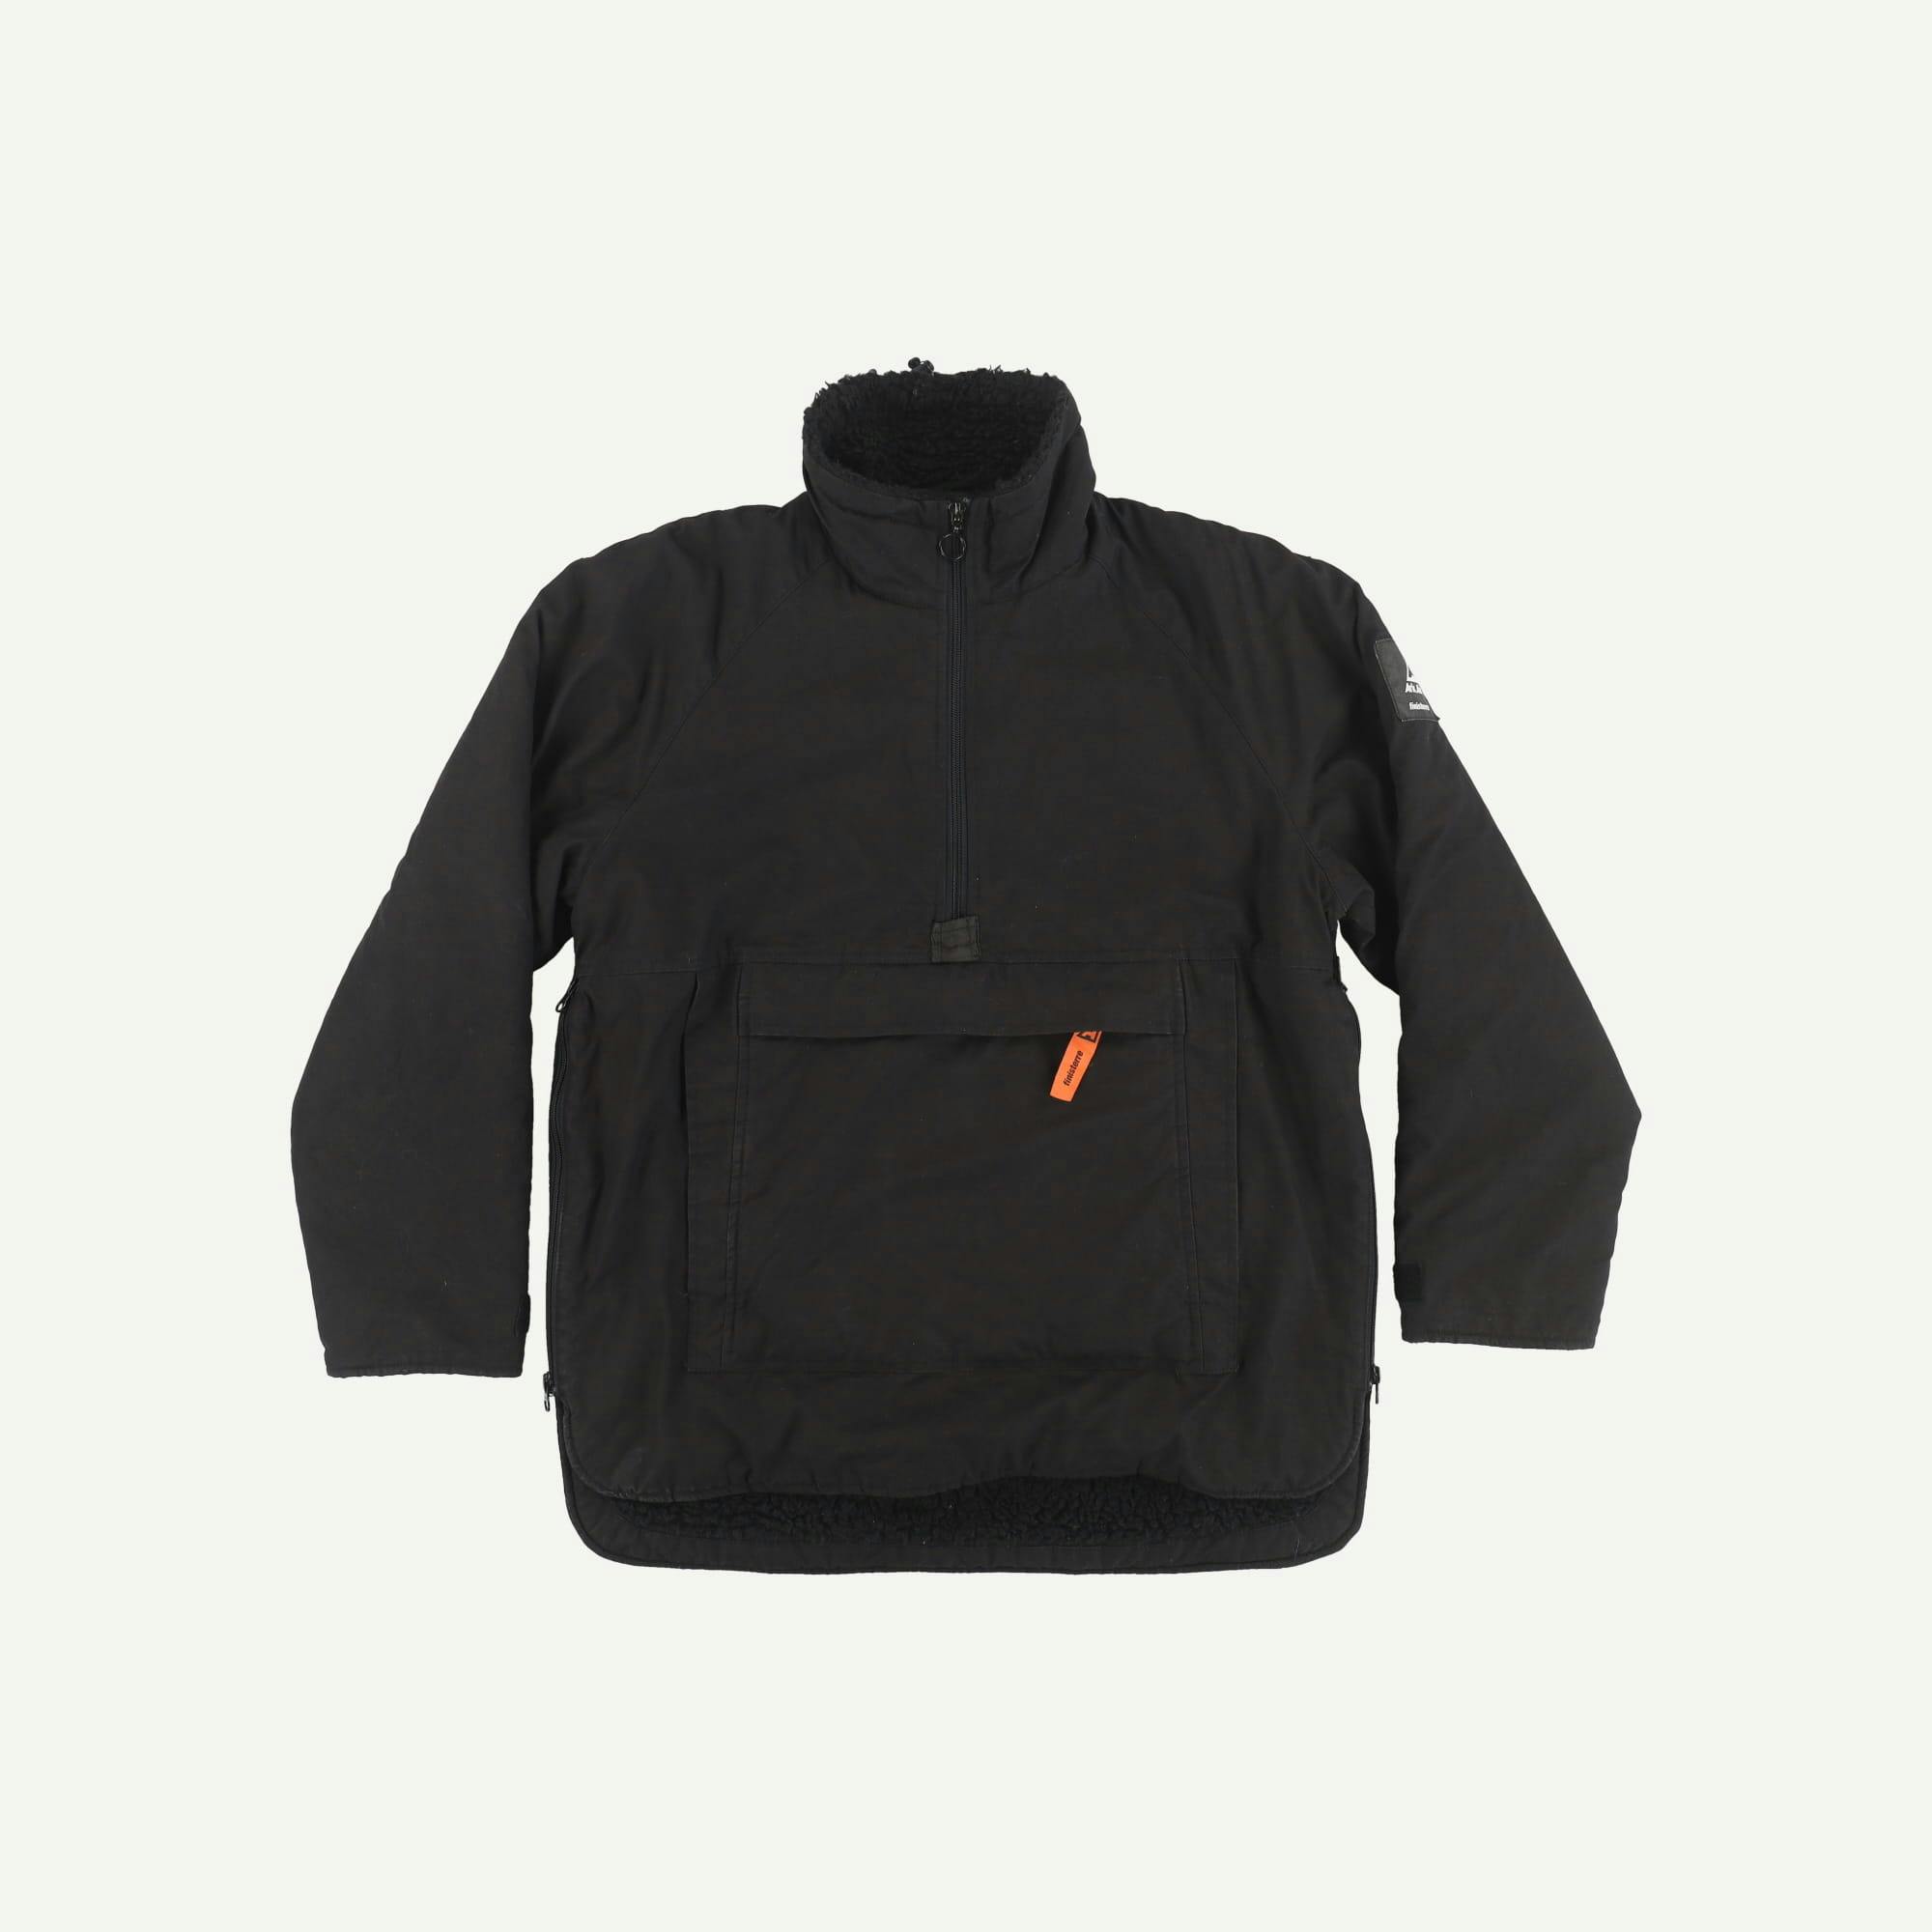 Finisterre Repaired Black Black coat Ark Air x Finisterre